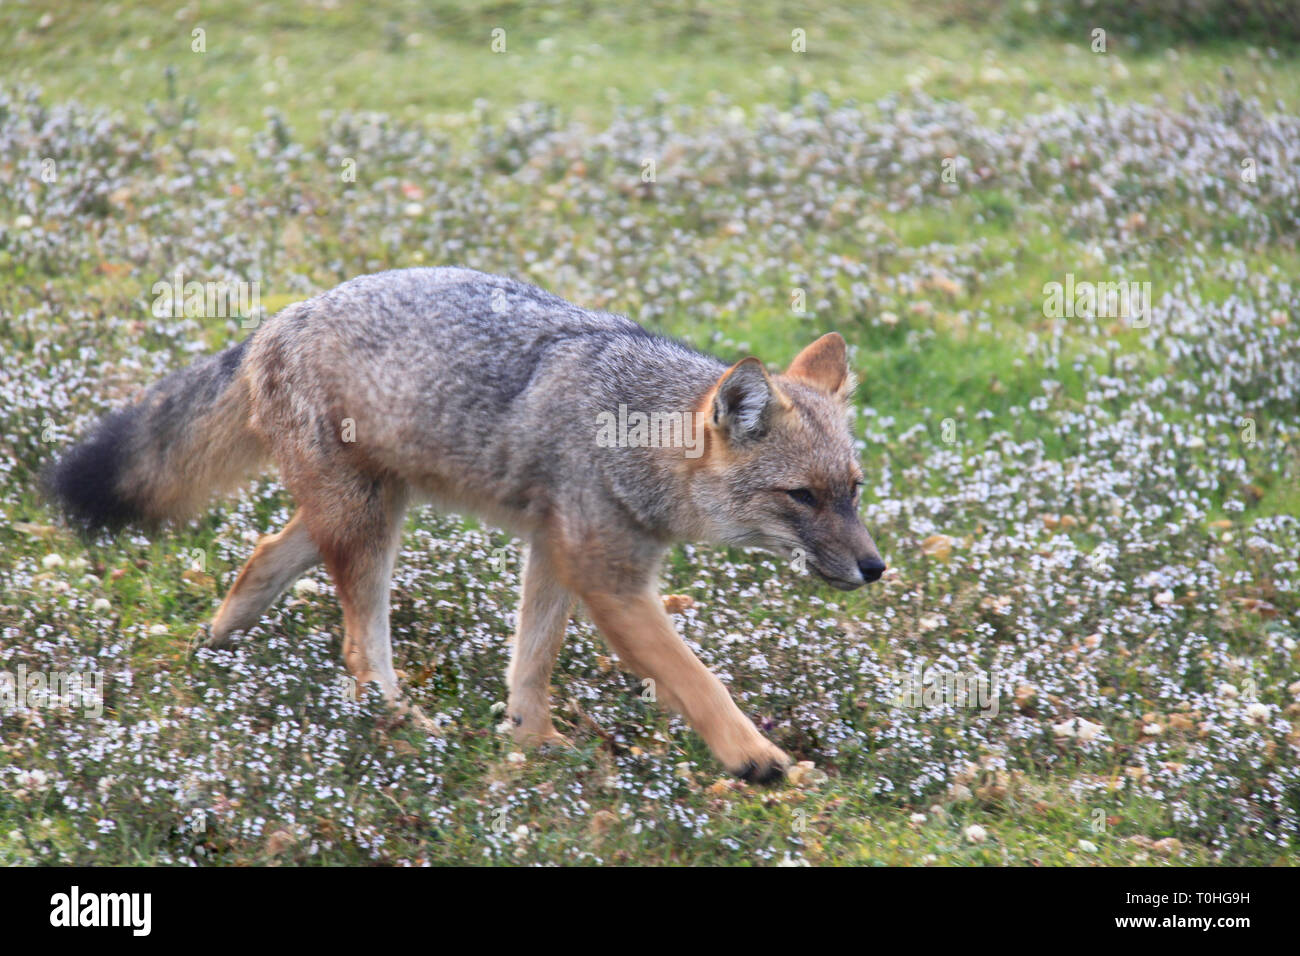 A south american gray fox (Pseudalopex griseus) walking over flowers at Tierra del Fuego National Park, Argentina. Stock Photo